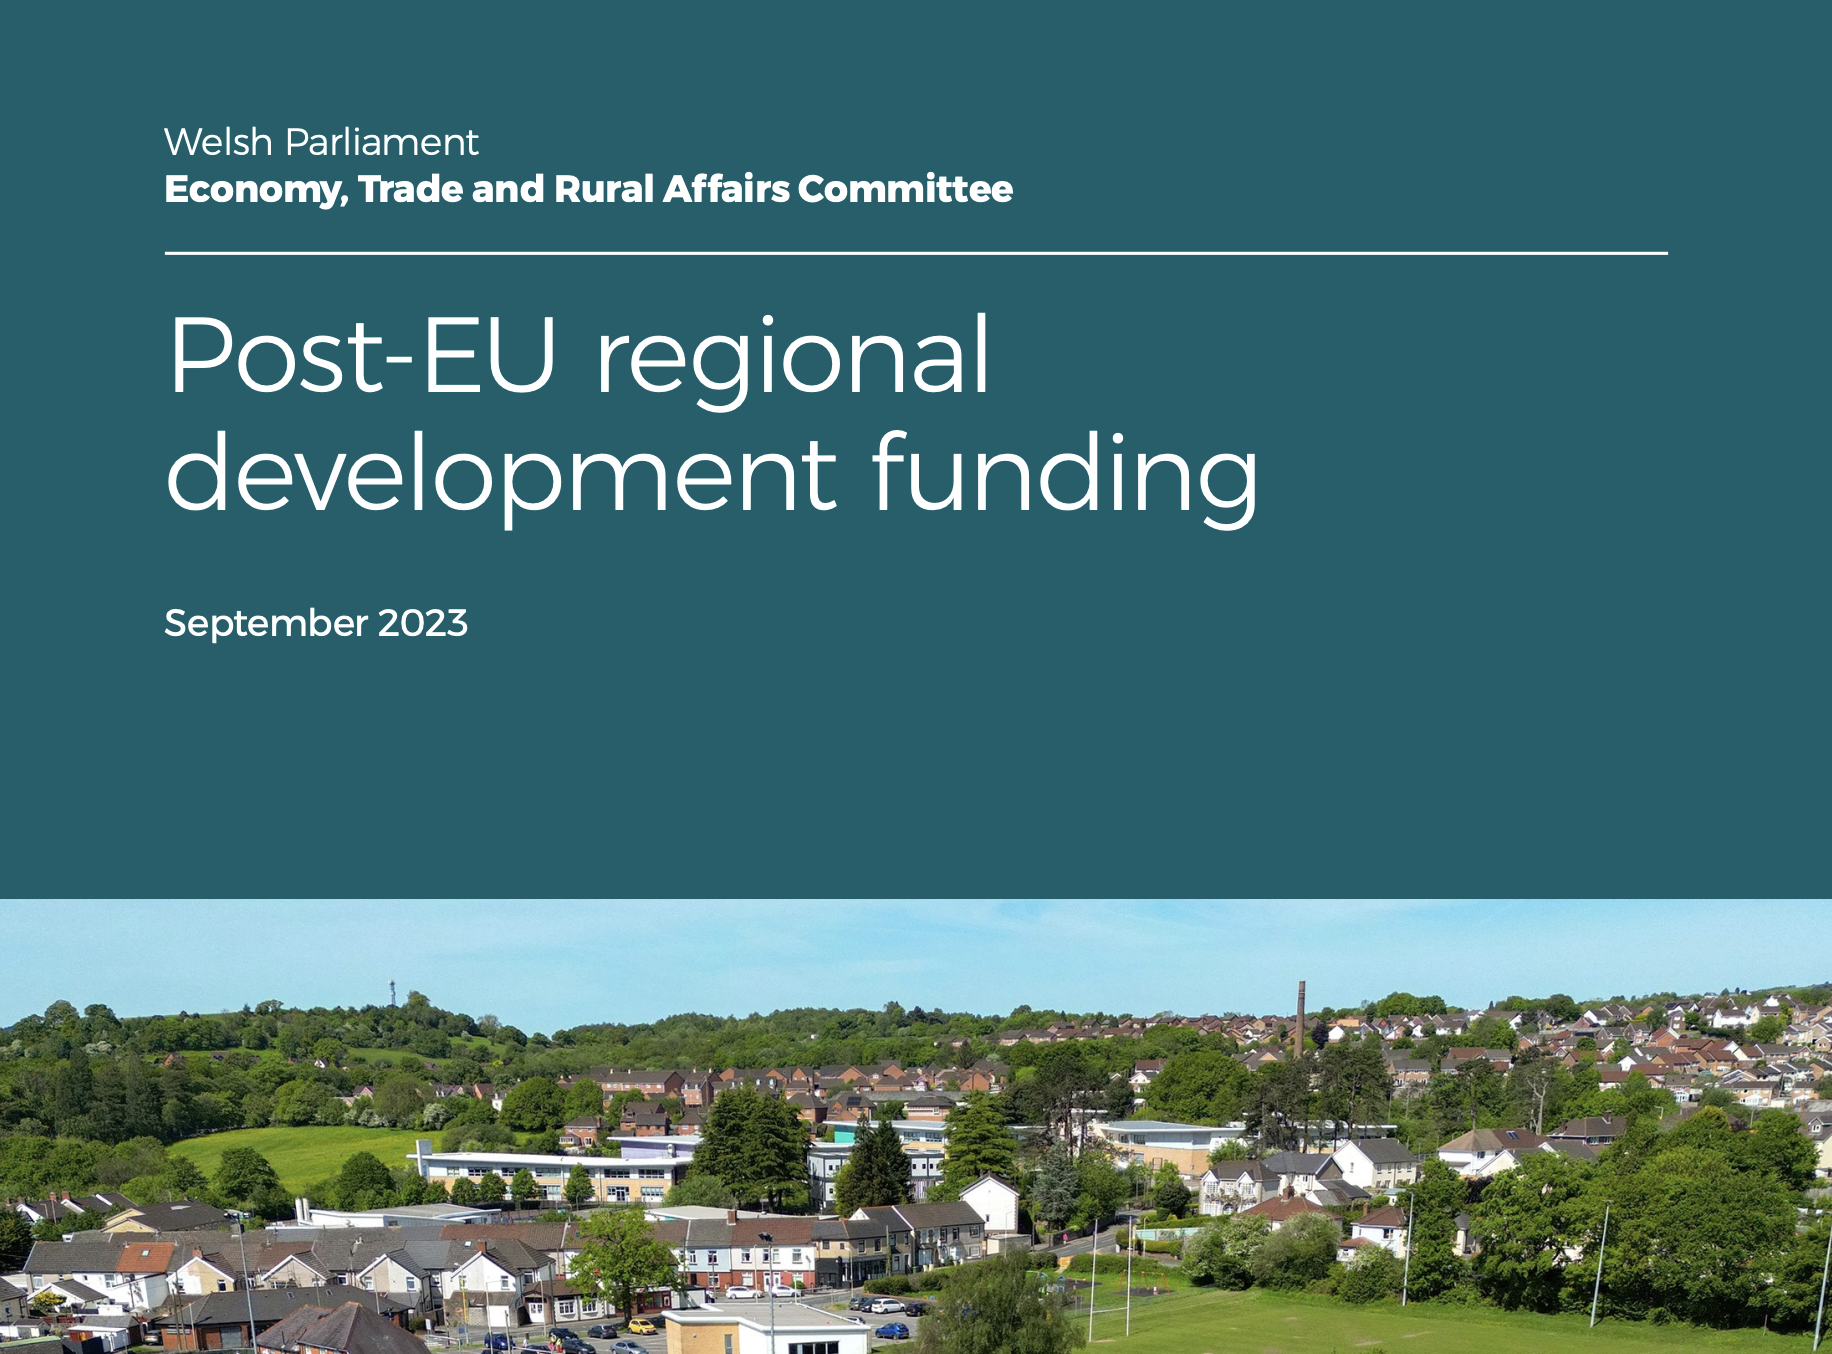 Cover of the Senedd's Economy, Trade and Rural Affairs Committee report on Post EU Development Funding